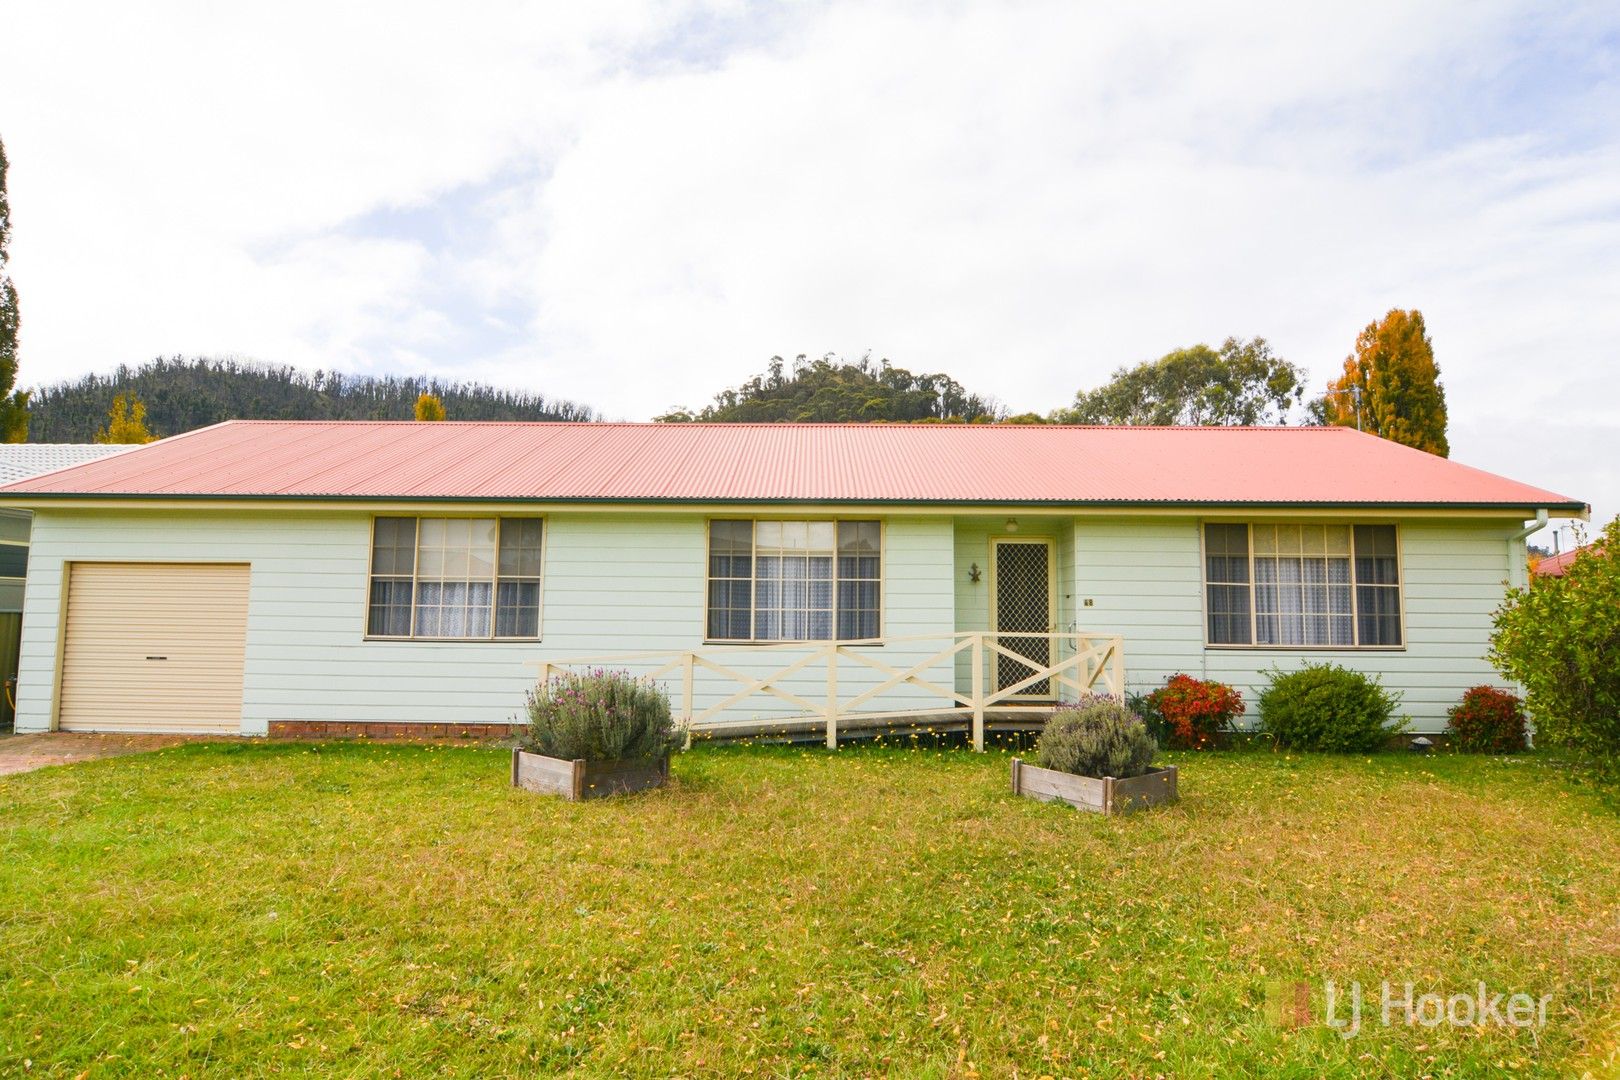 48 Clarice Street, Lithgow NSW 2790, Image 0